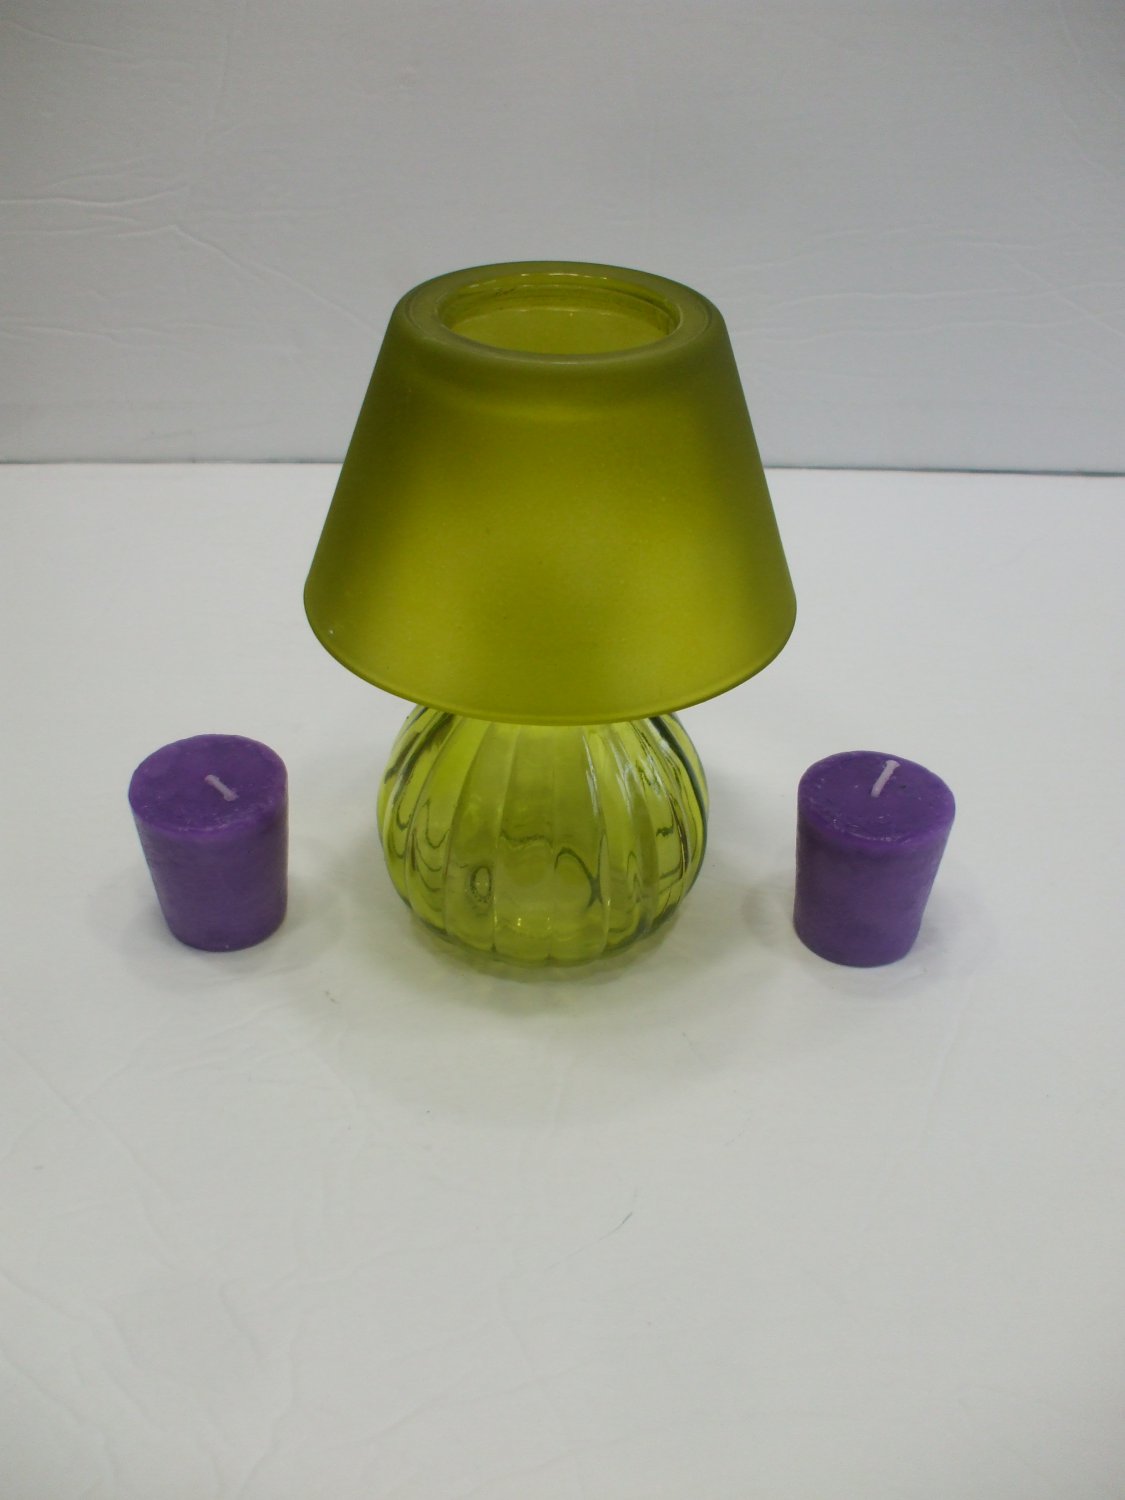 Mini Green Glass Candle Holder Lamp With 2 Mini lavender Scented Votive Candles